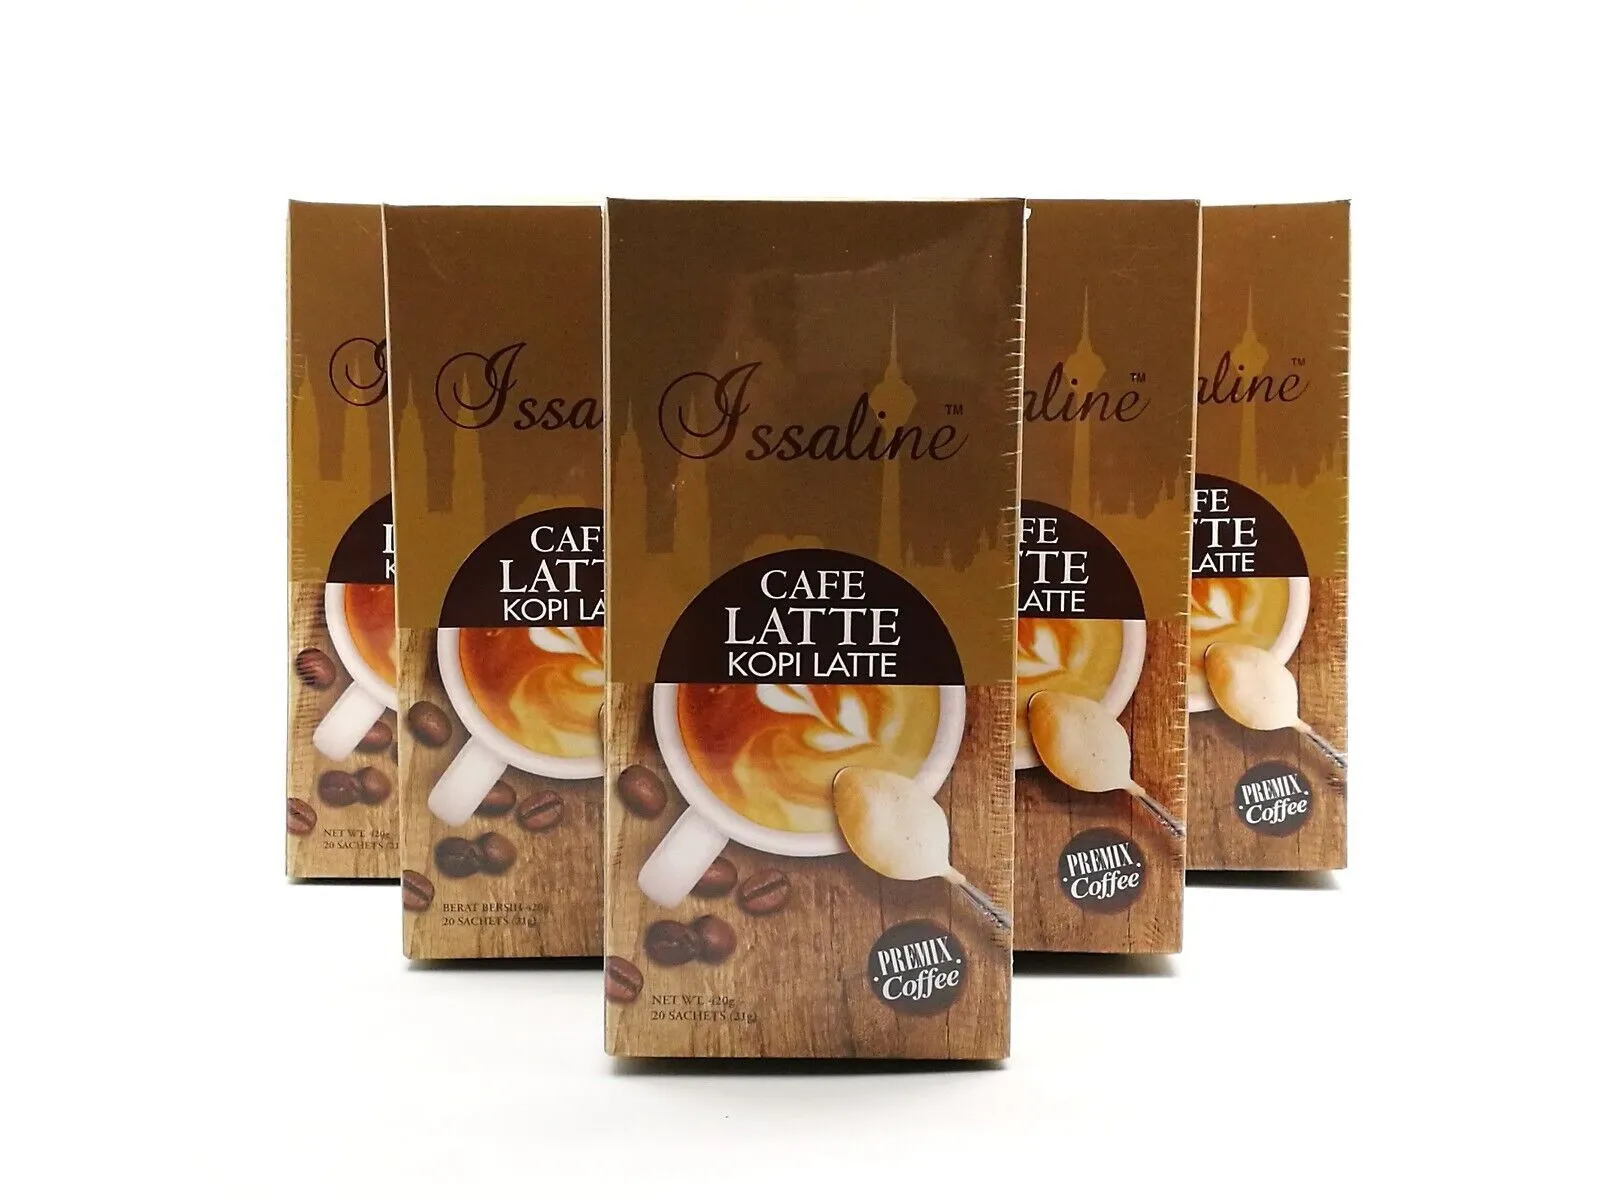 10 Boxes X Issaline Gourmet Cafe Latte 100% Ganoderma Lucidum Extract Co... - $339.00